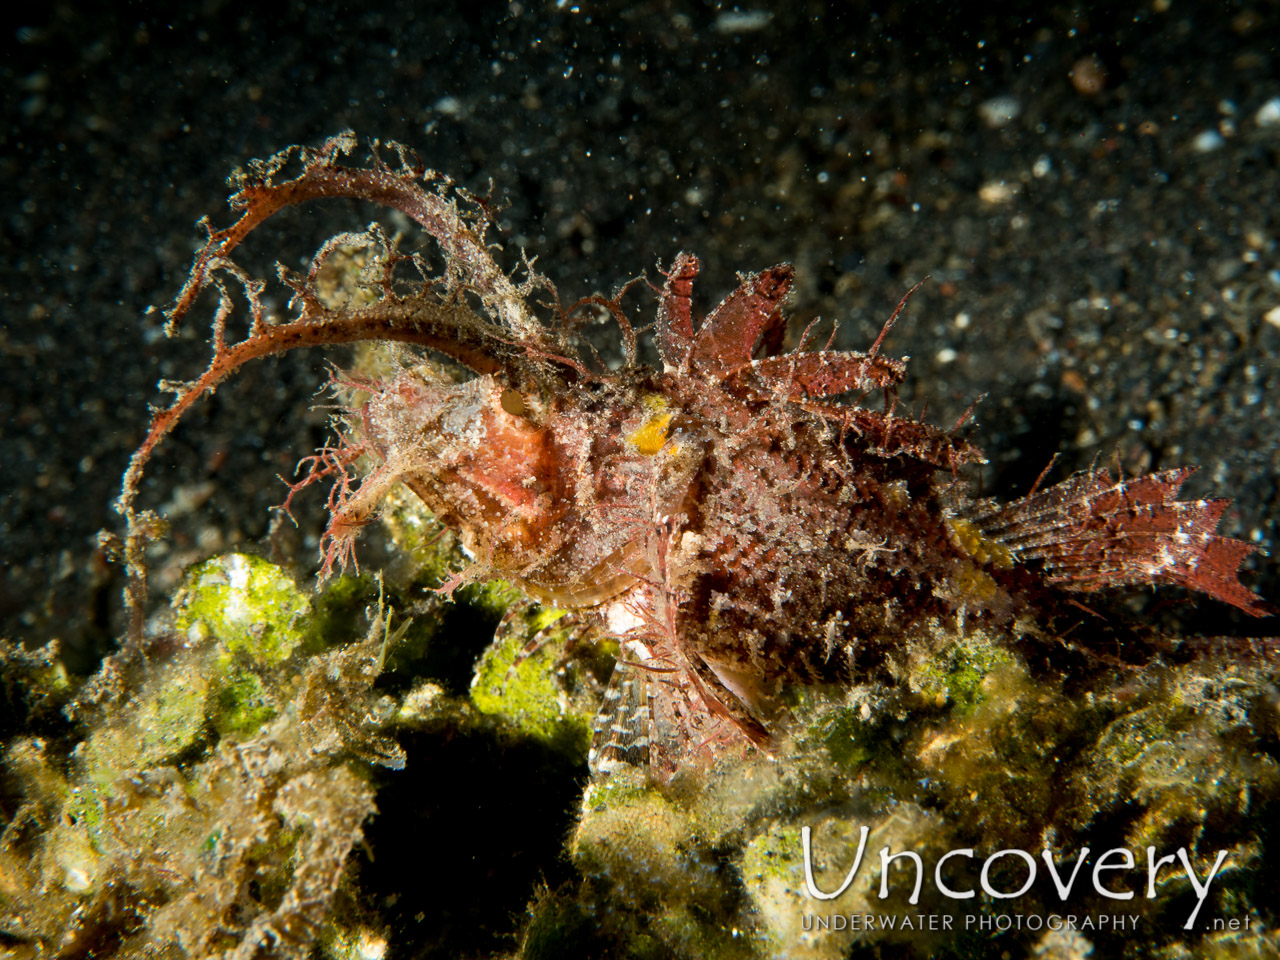 Ambon Scorpionfish (pteroidichthys Amboniensis) shot in Indonesia|North Sulawesi|Lembeh Strait|Hairball